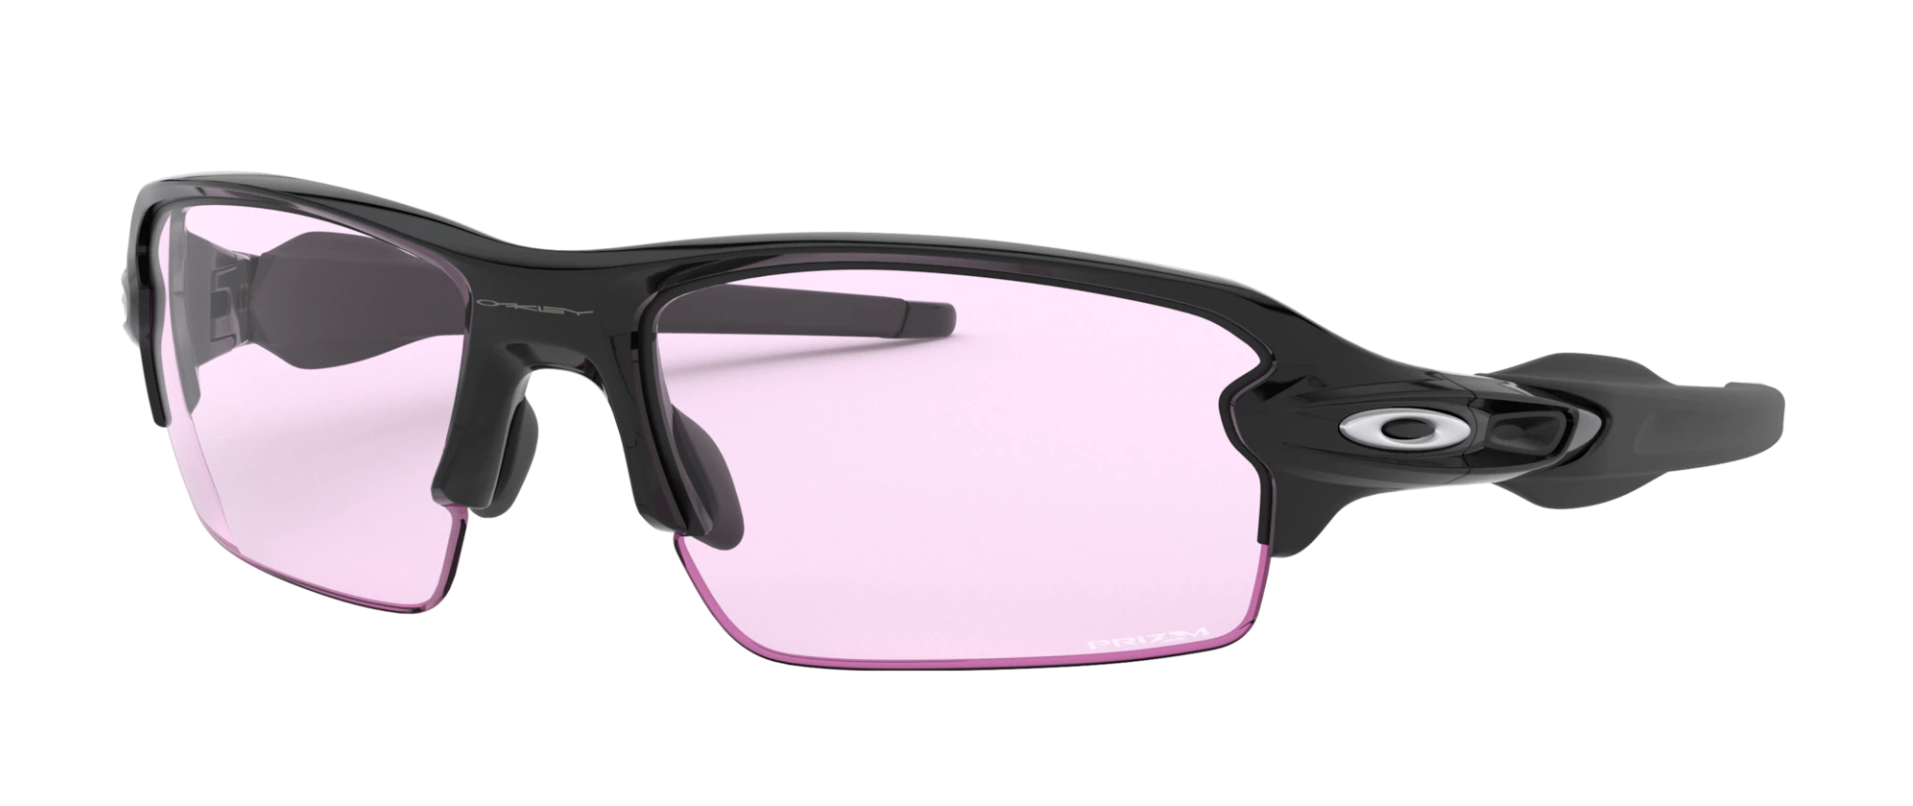 best lenses for baseball night games featuring the oakley prizm low light lens in flak 2.0 asian fit frame